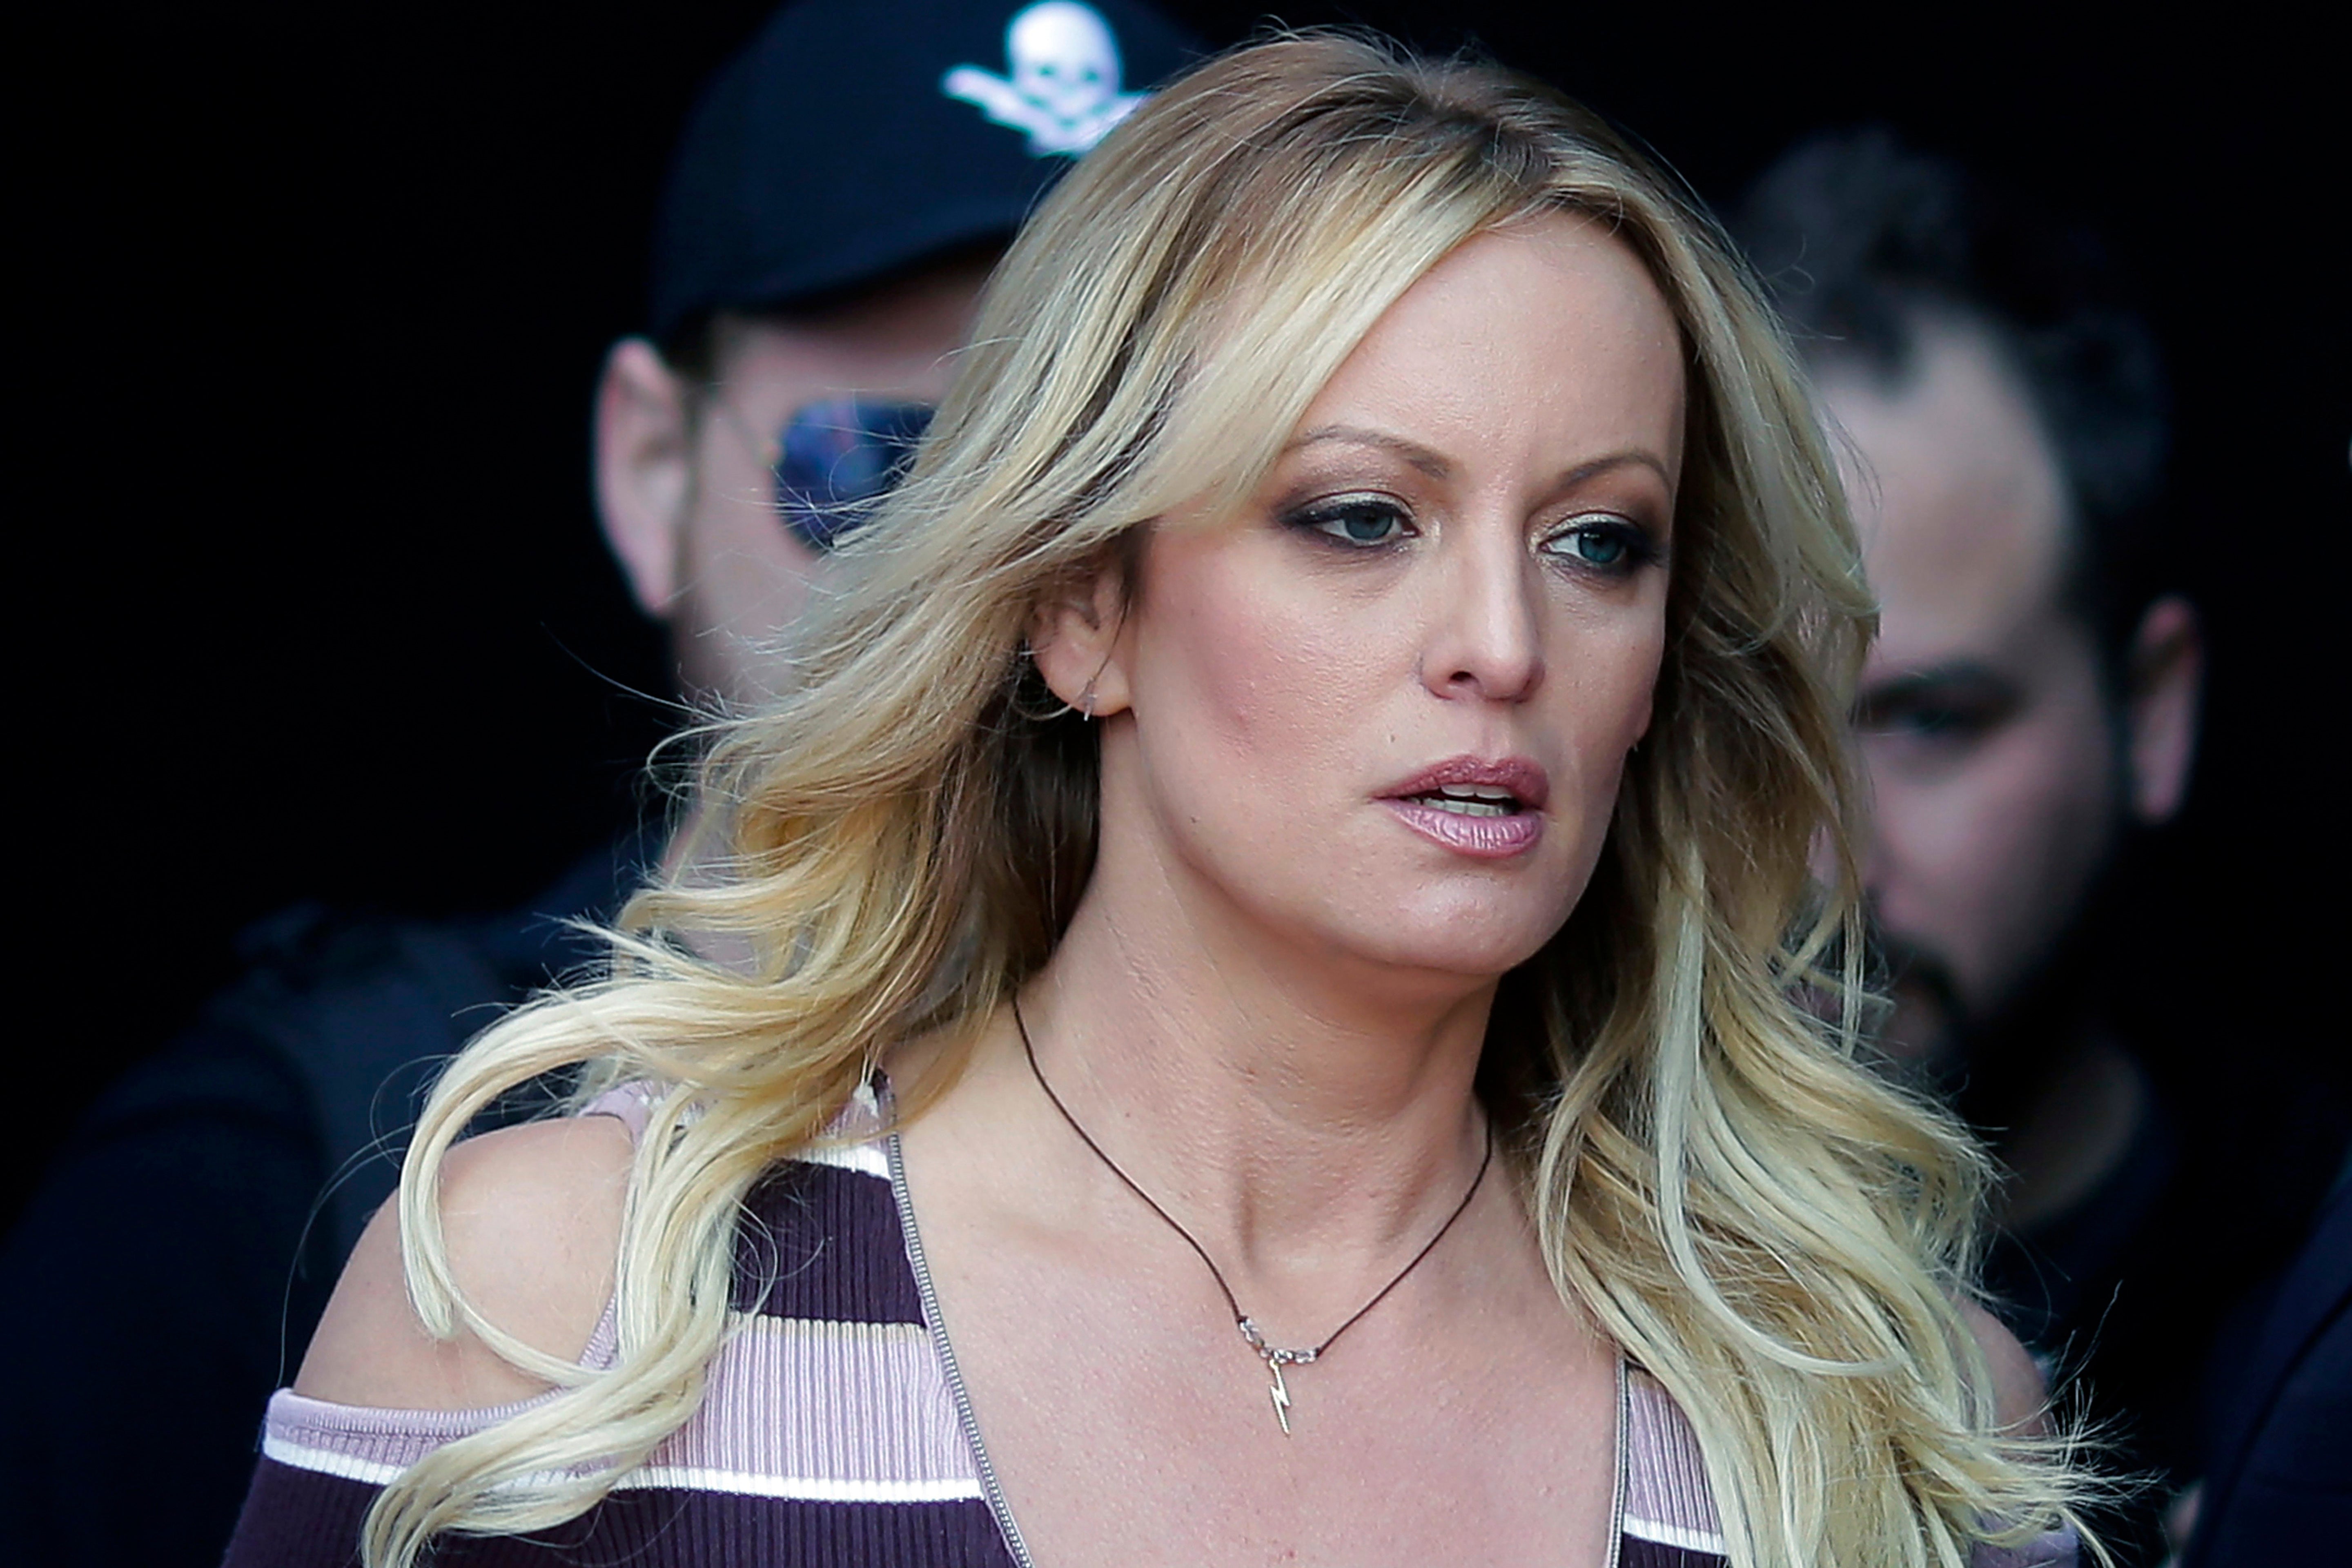 Stormy Daniels made headlines in 2018 when she came forward with an allegation that she had been in an affair with the president